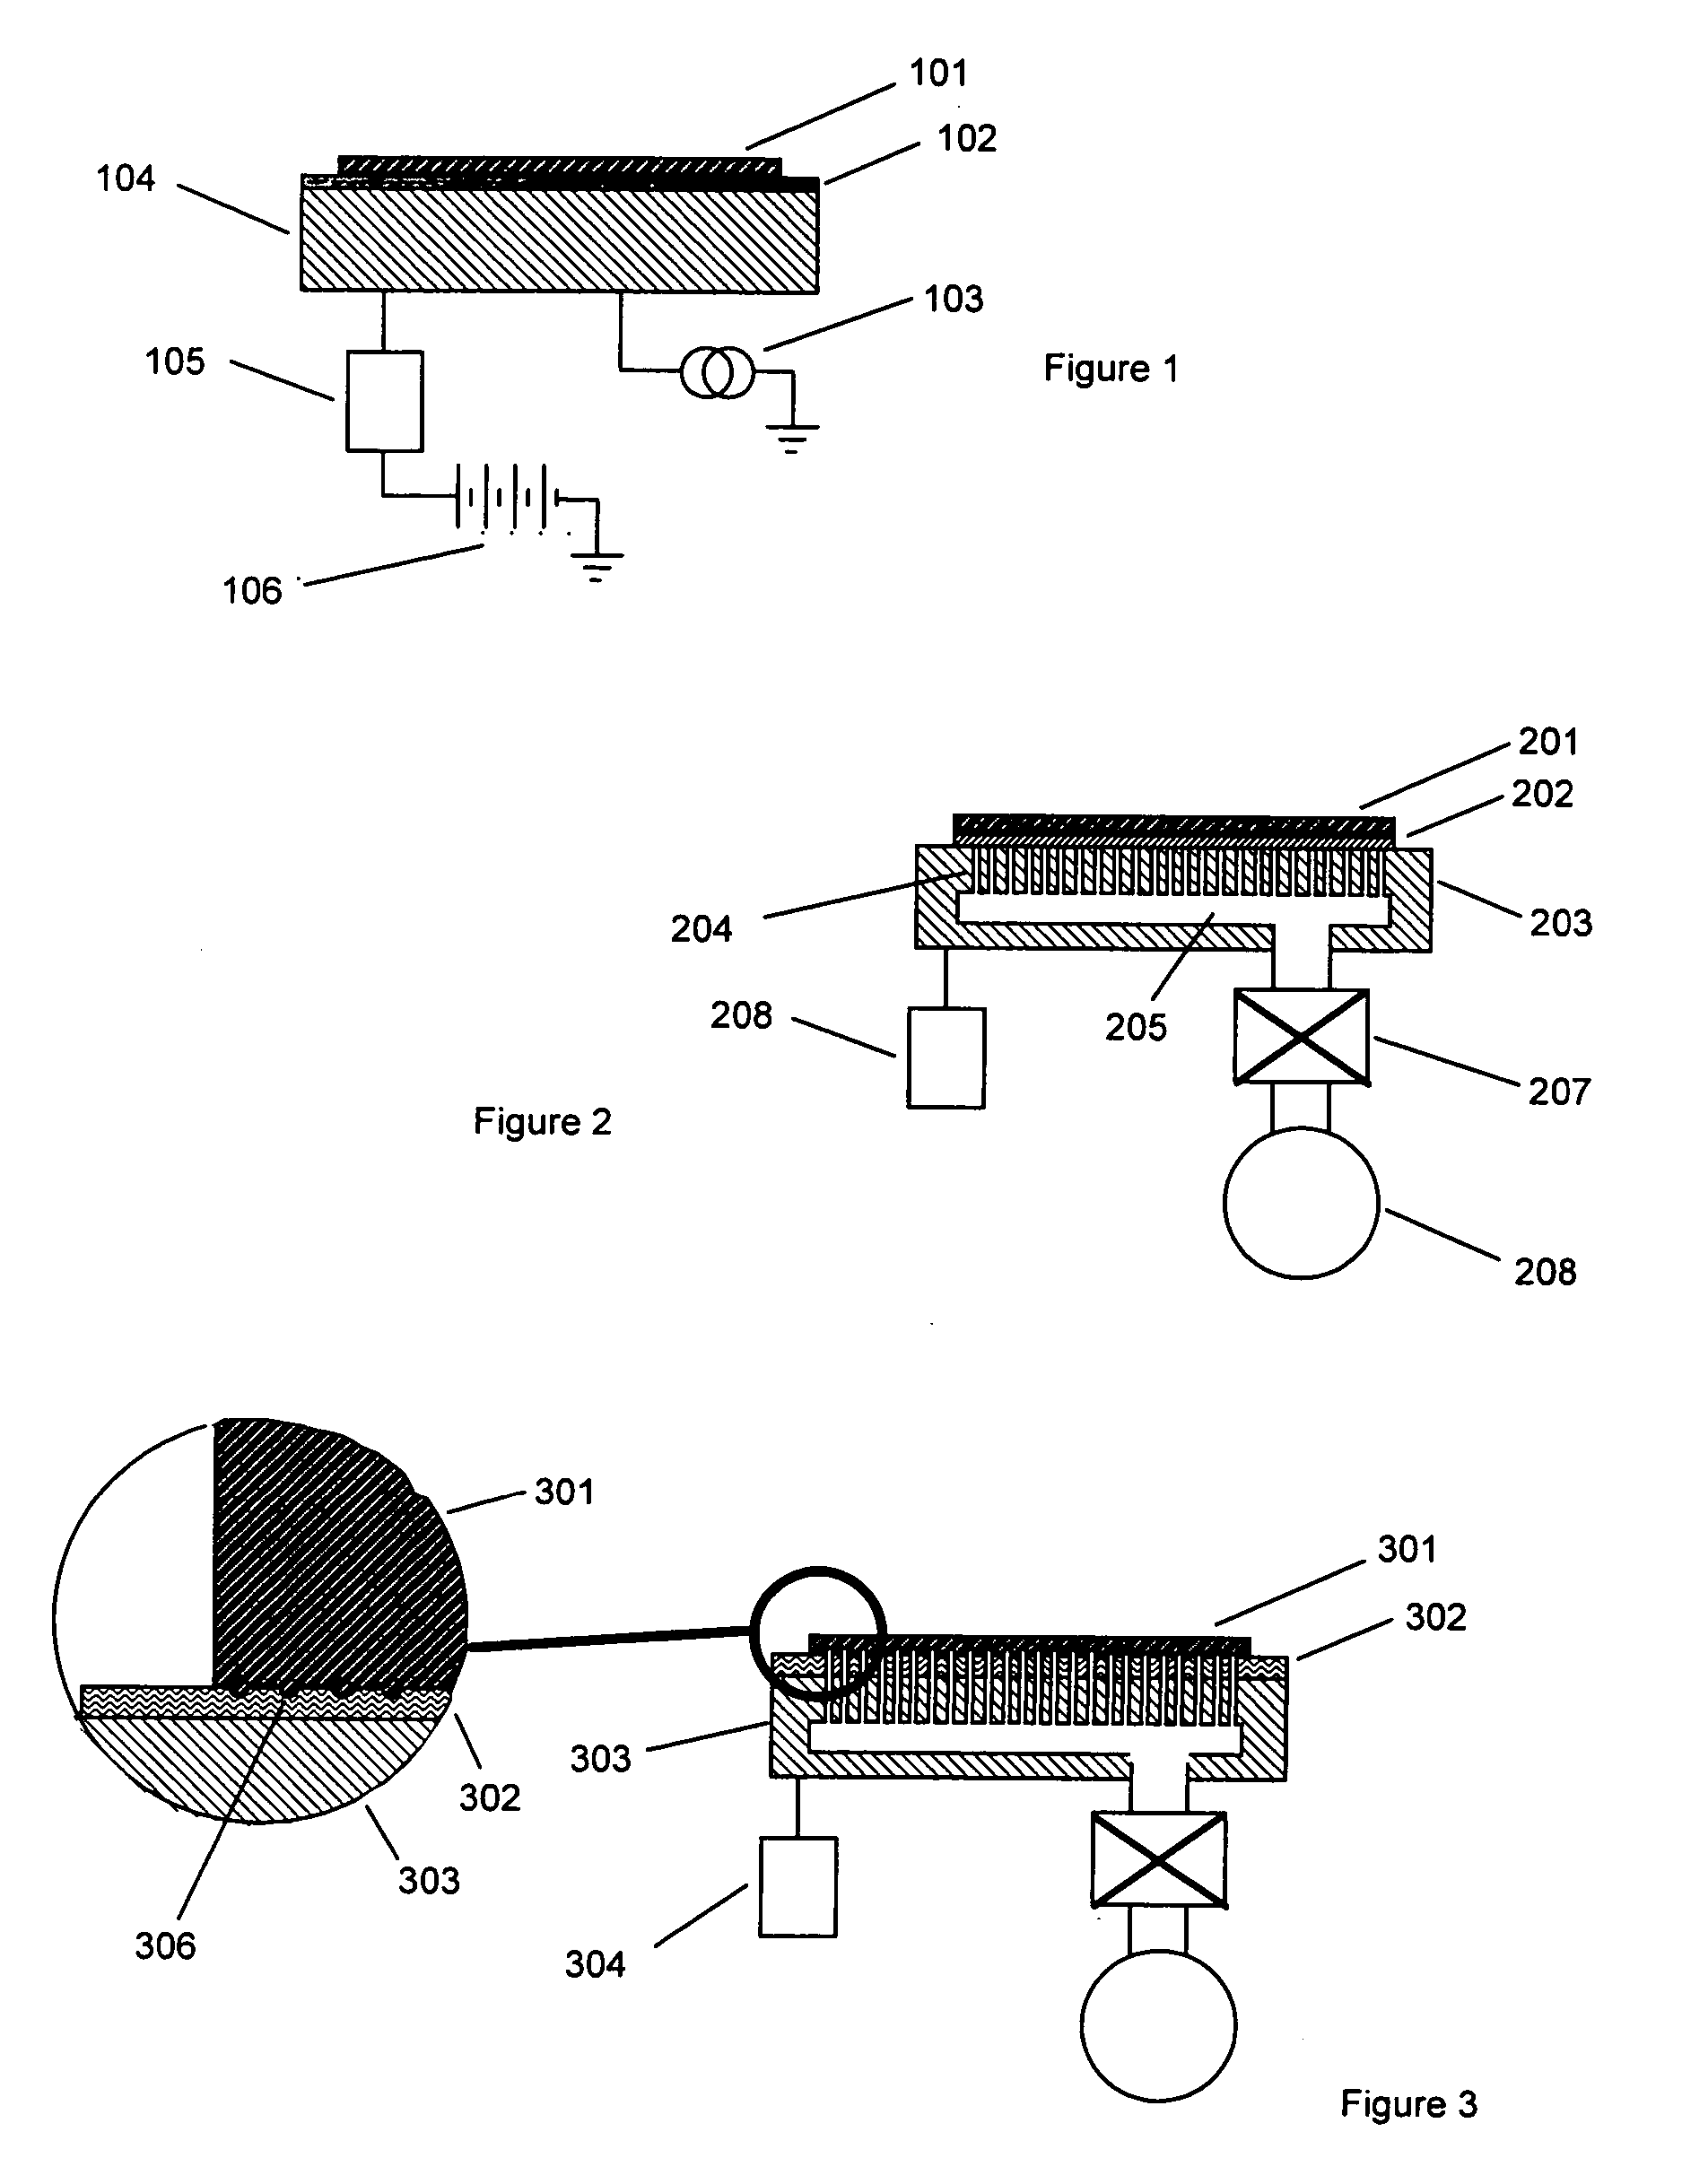 Clamp for holding and efficiently removing heat from workpieces